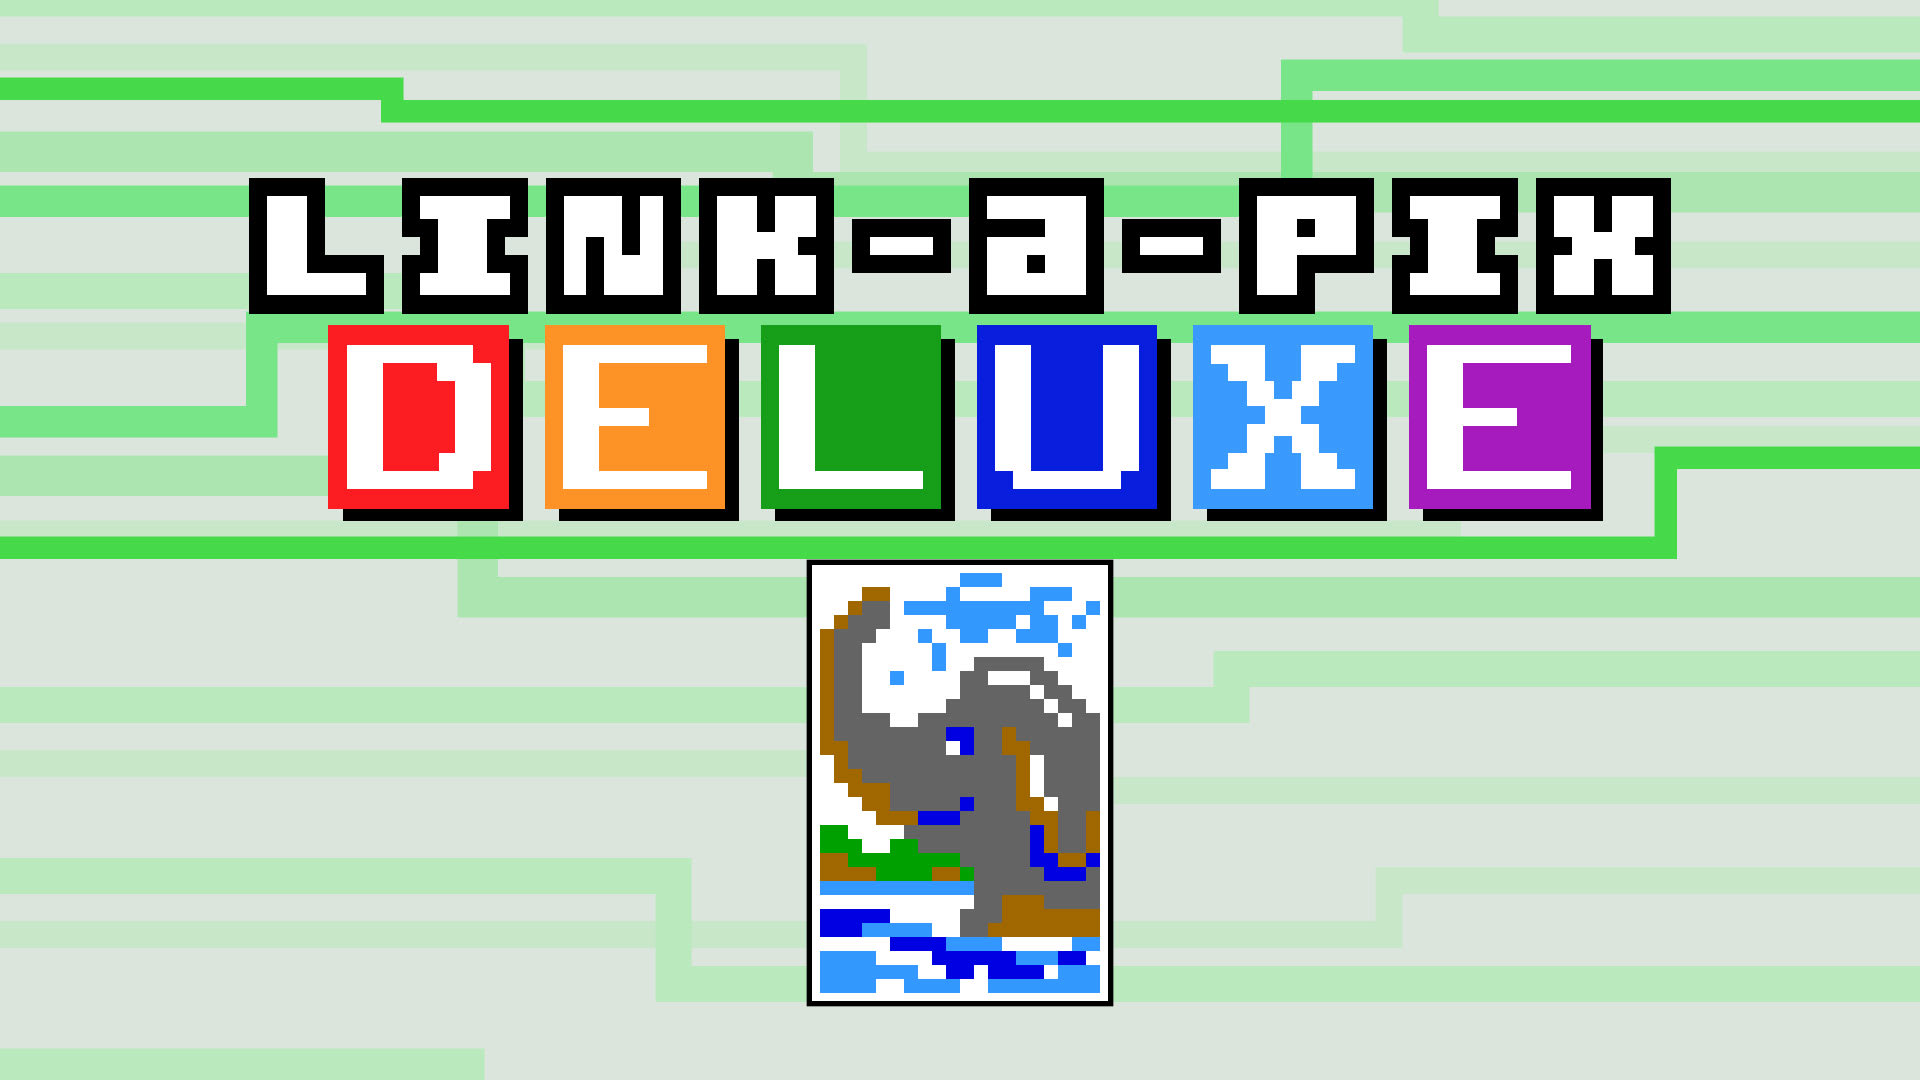 Link-a-Pix Deluxe